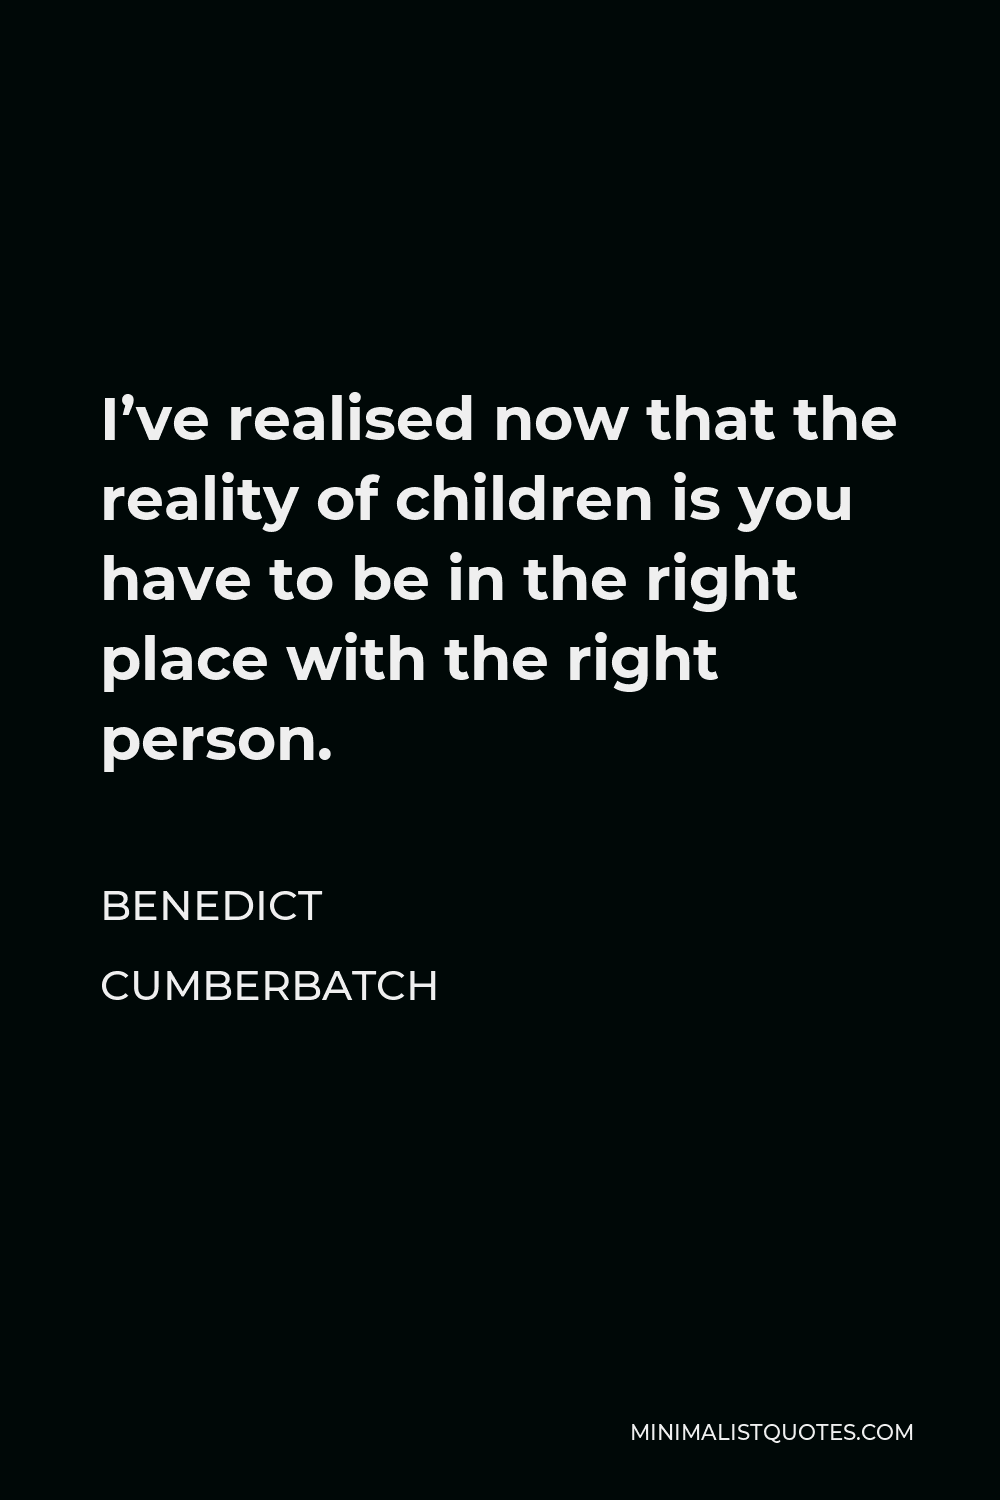 Benedict Cumberbatch Quote - I’ve realised now that the reality of children is you have to be in the right place with the right person.